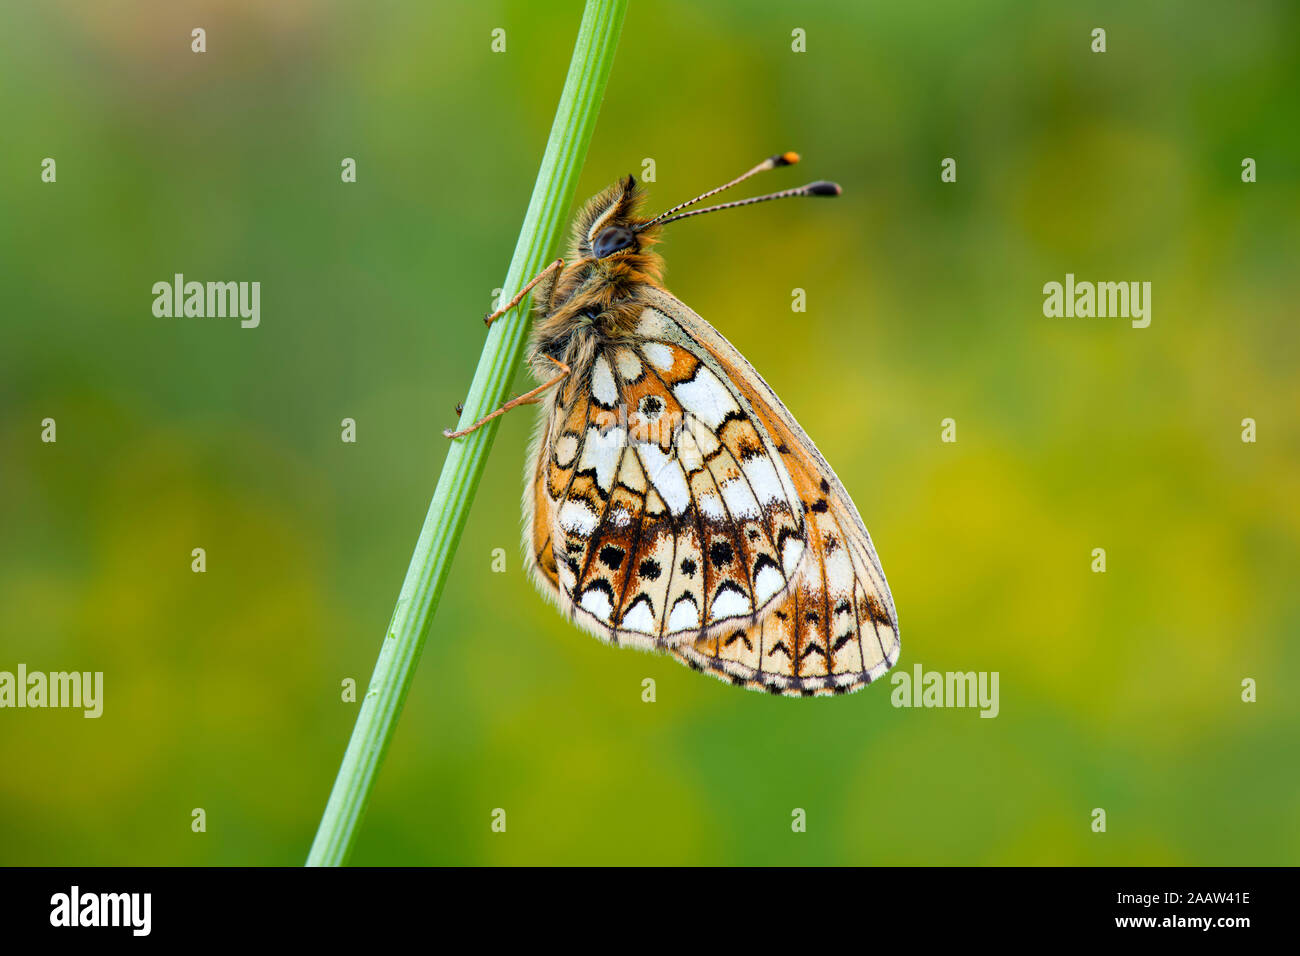 Close-up of pearl-bordered fritillary on plant stem Stock Photo